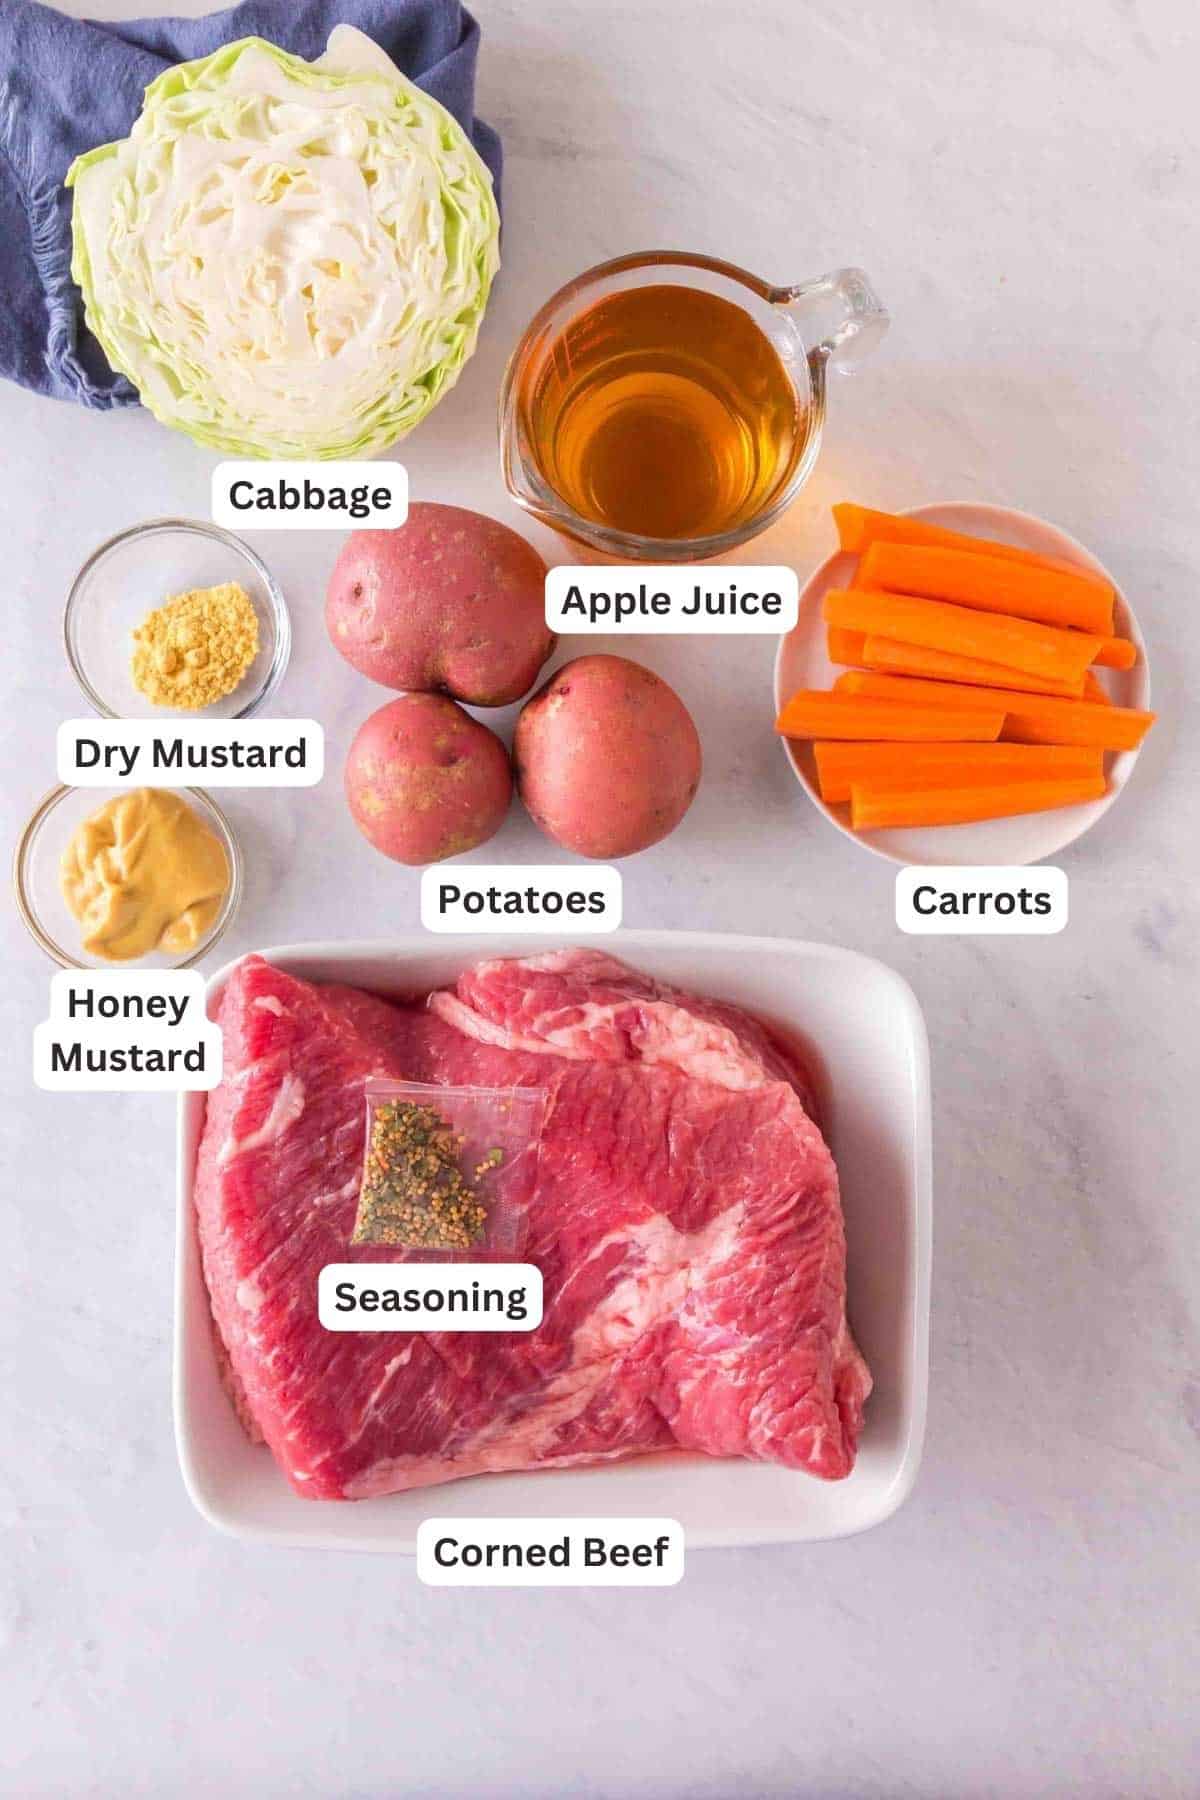 Ingredients for Corned Beef and Cabbage.